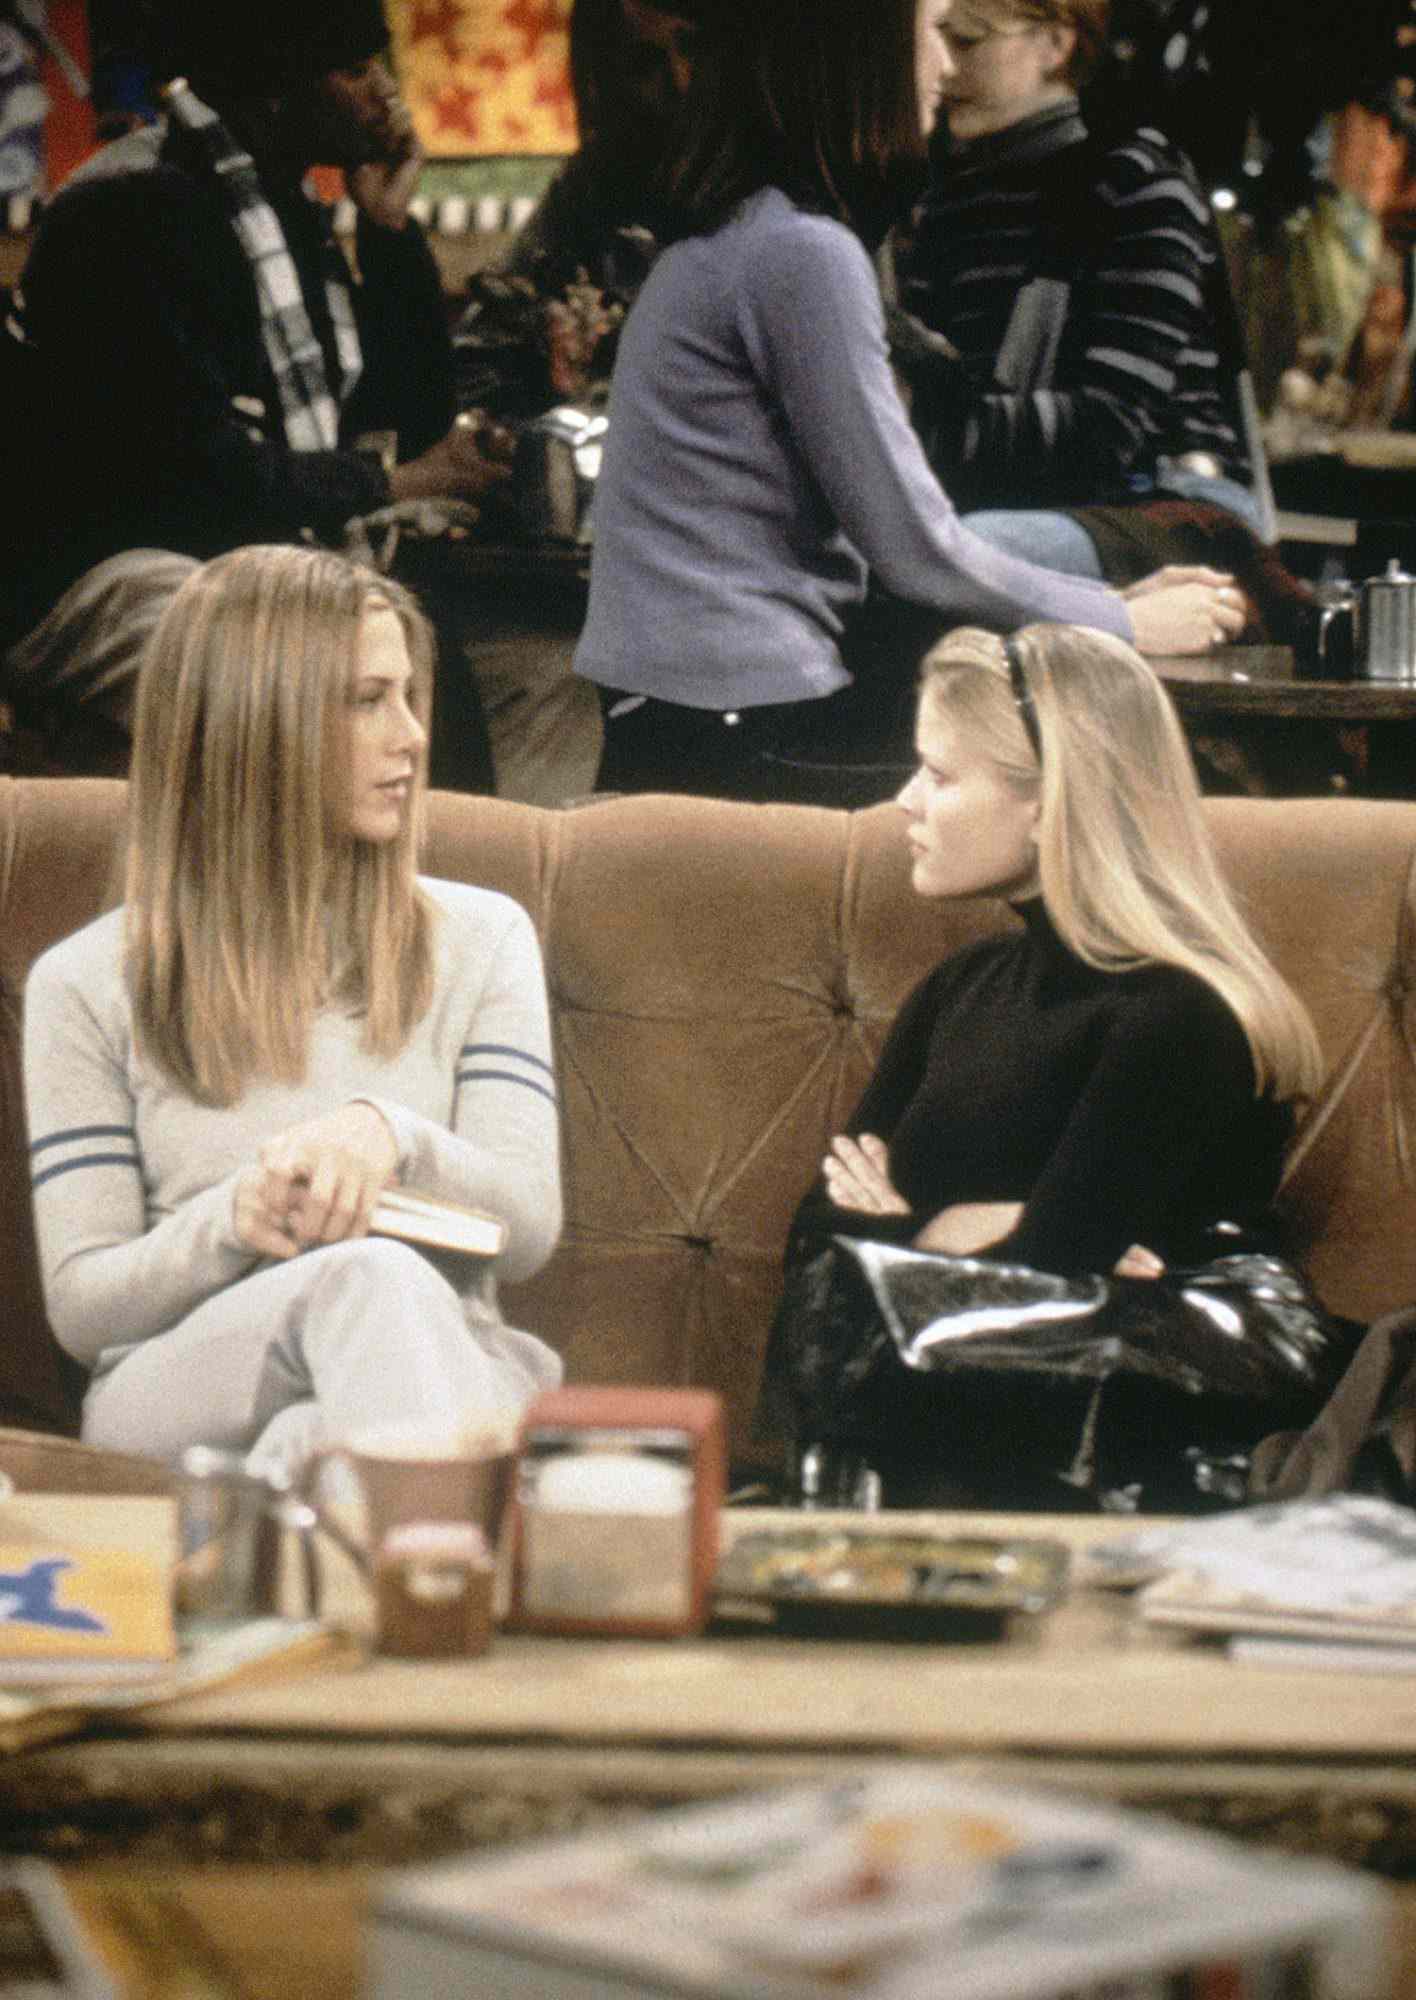 FRIENDS -- "The One with Rachel's Sister" Episode 13 -- Pictured: (l-r) Jennifer Aniston as Rachel Green, Reese Witherspoon as Jill Greene